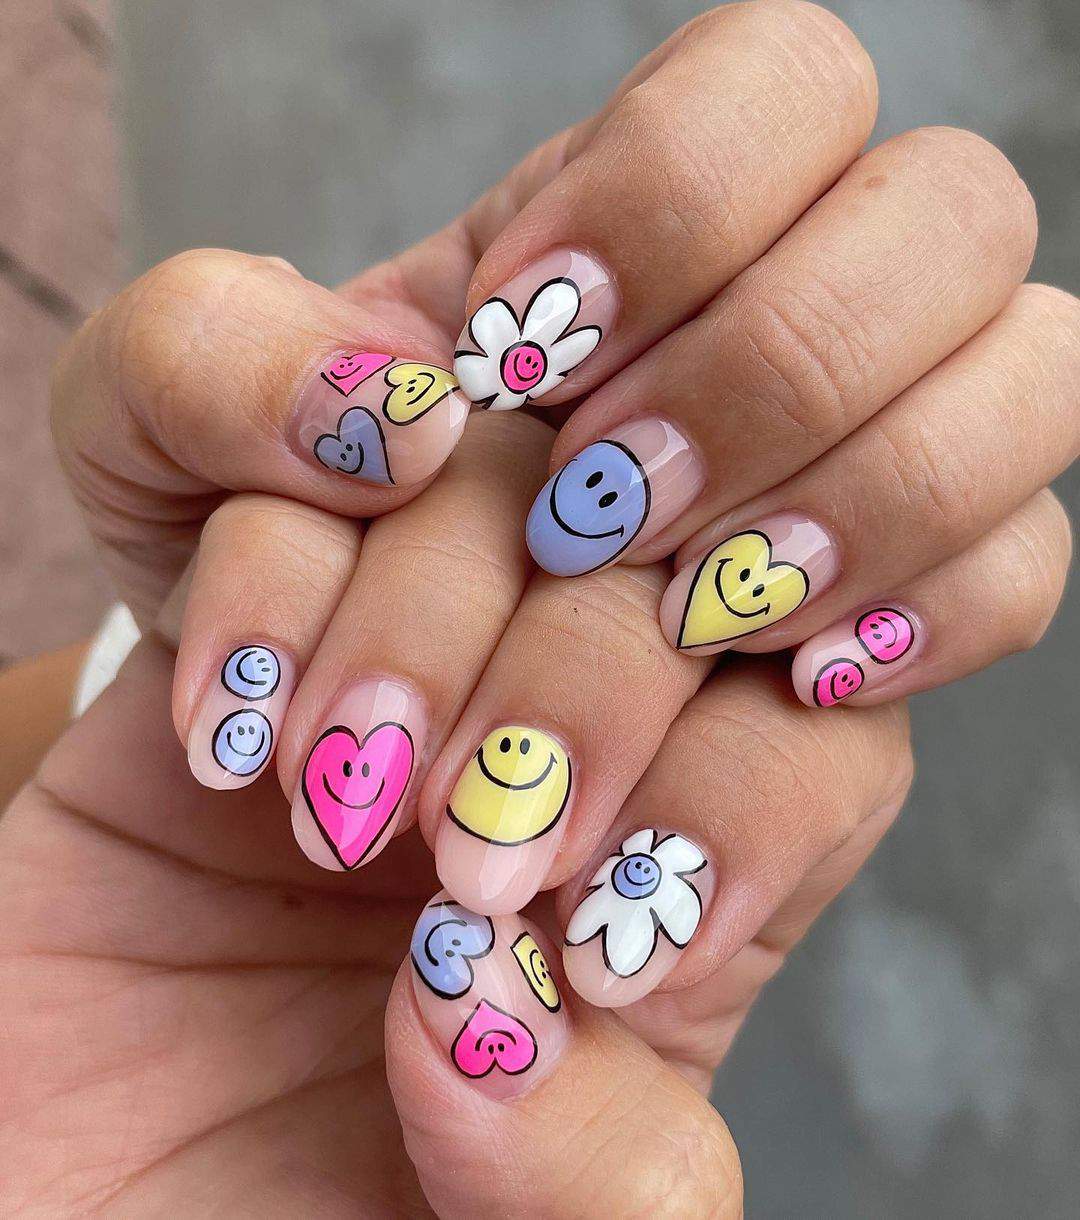 The 100+ Best Nail Designs Trends And Ideas In 2021 images 37